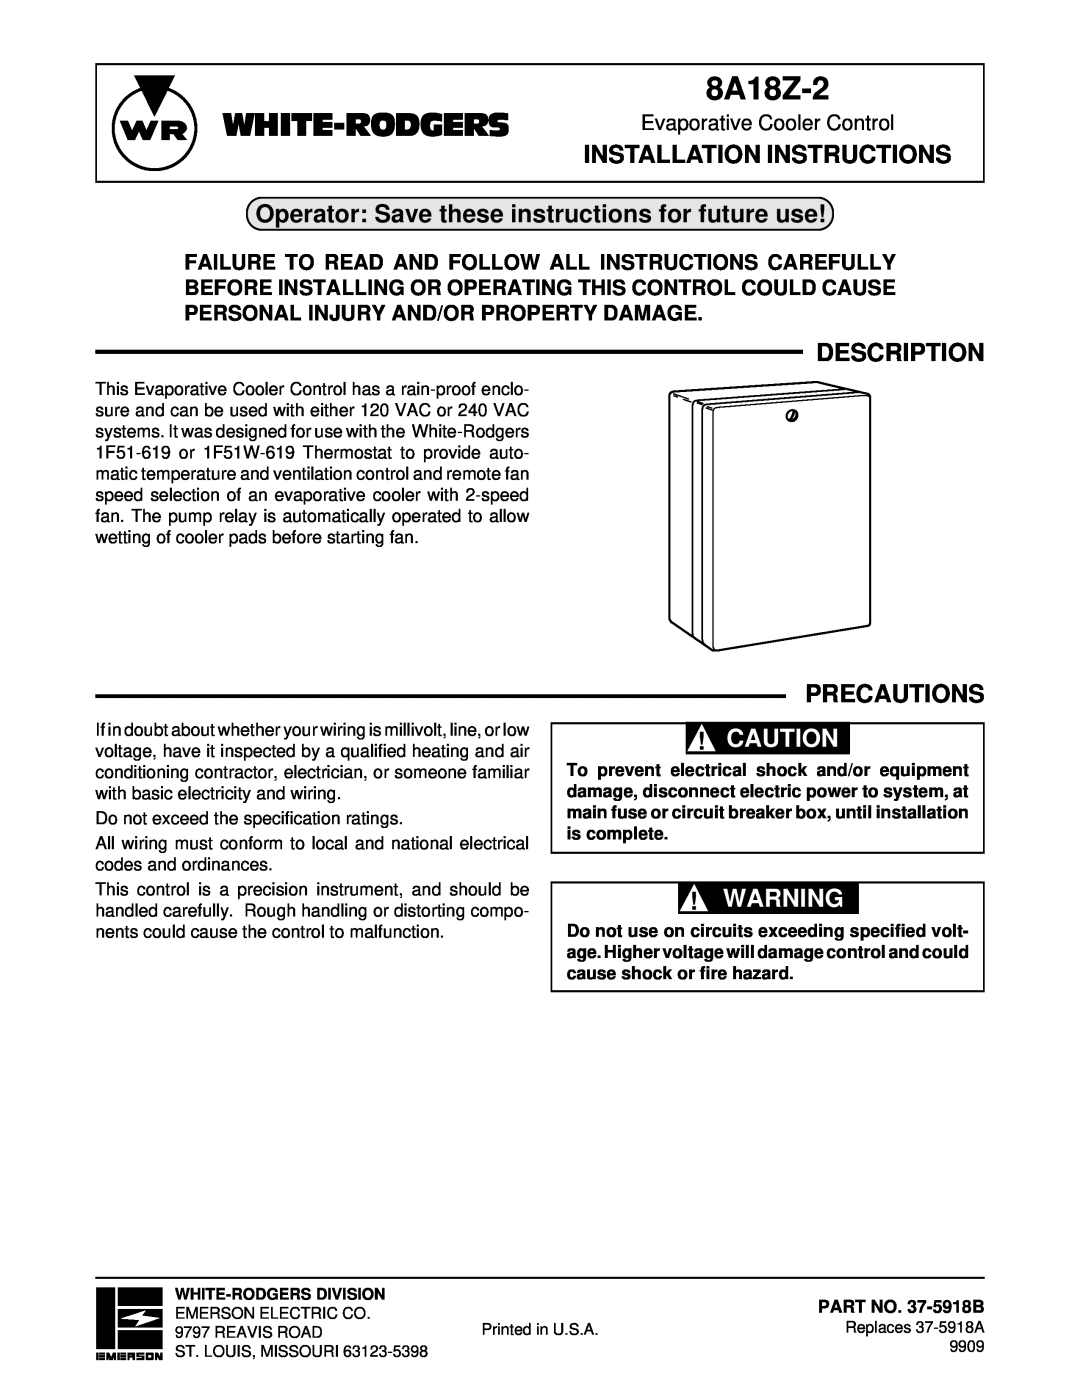 White Rodgers 8A18Z-2 installation instructions Operator Save these instructions for future use, Description, Precautions 